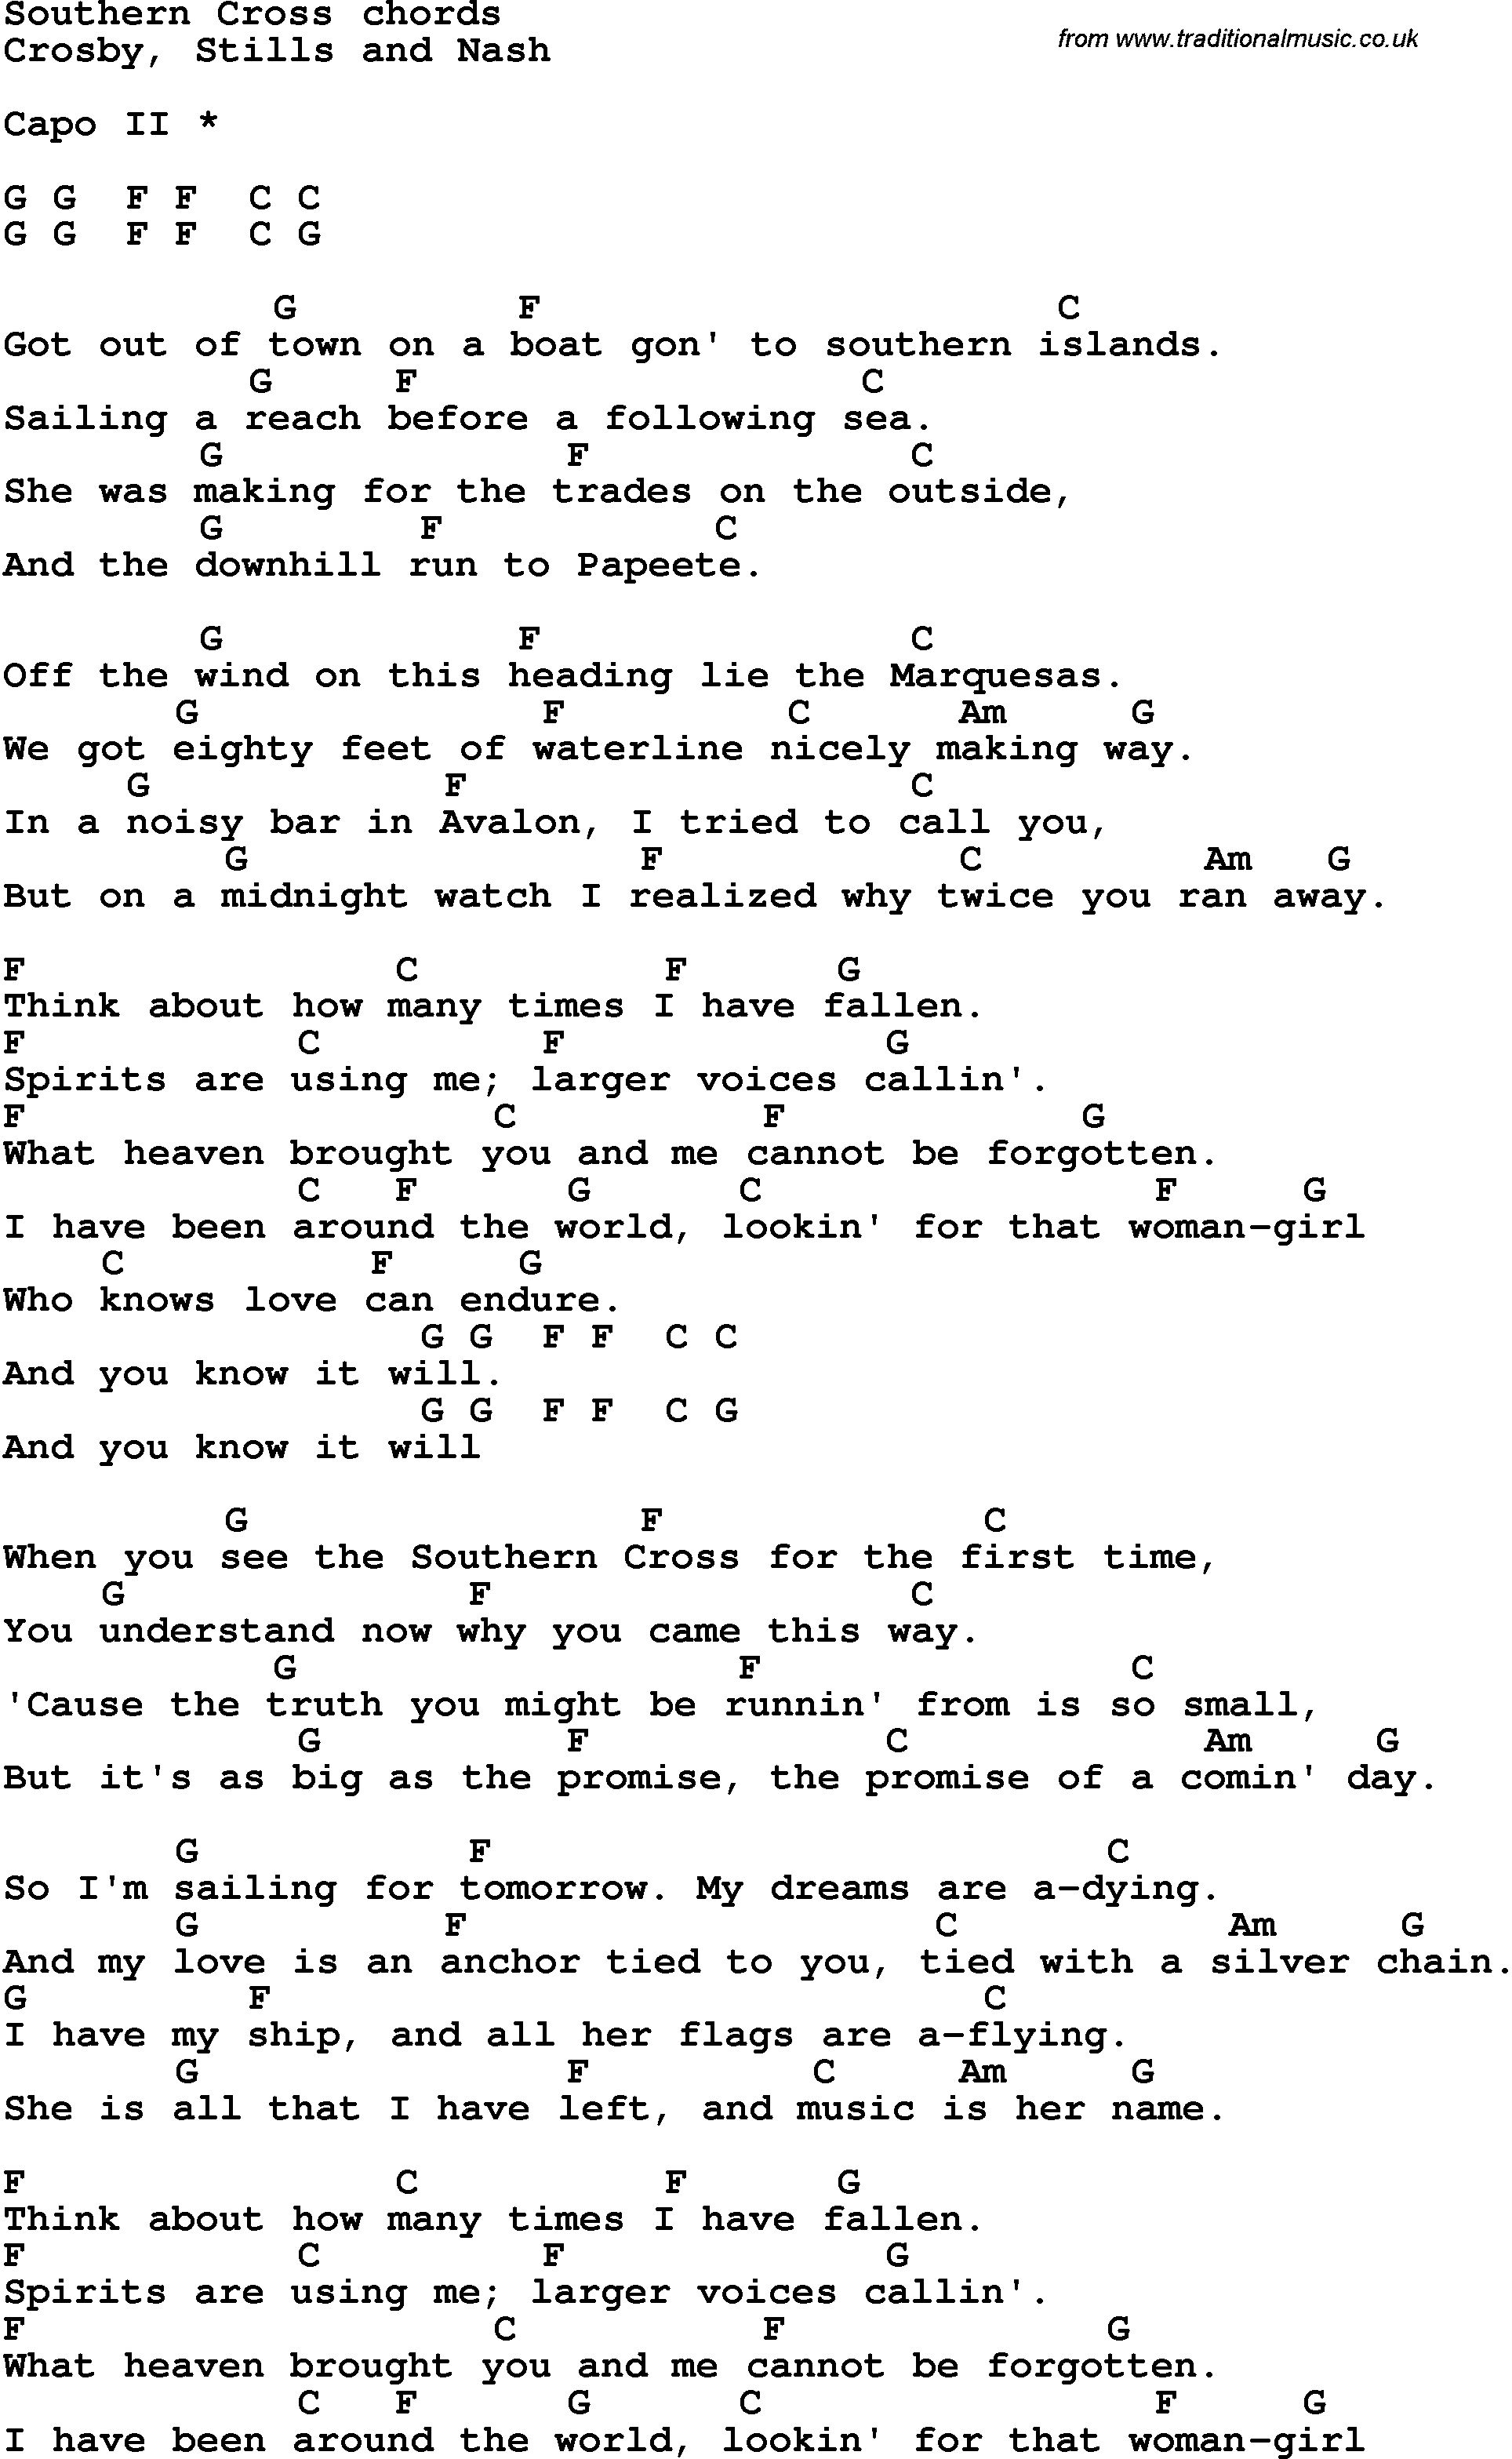 Song Lyrics with guitar chords for Southern Cross